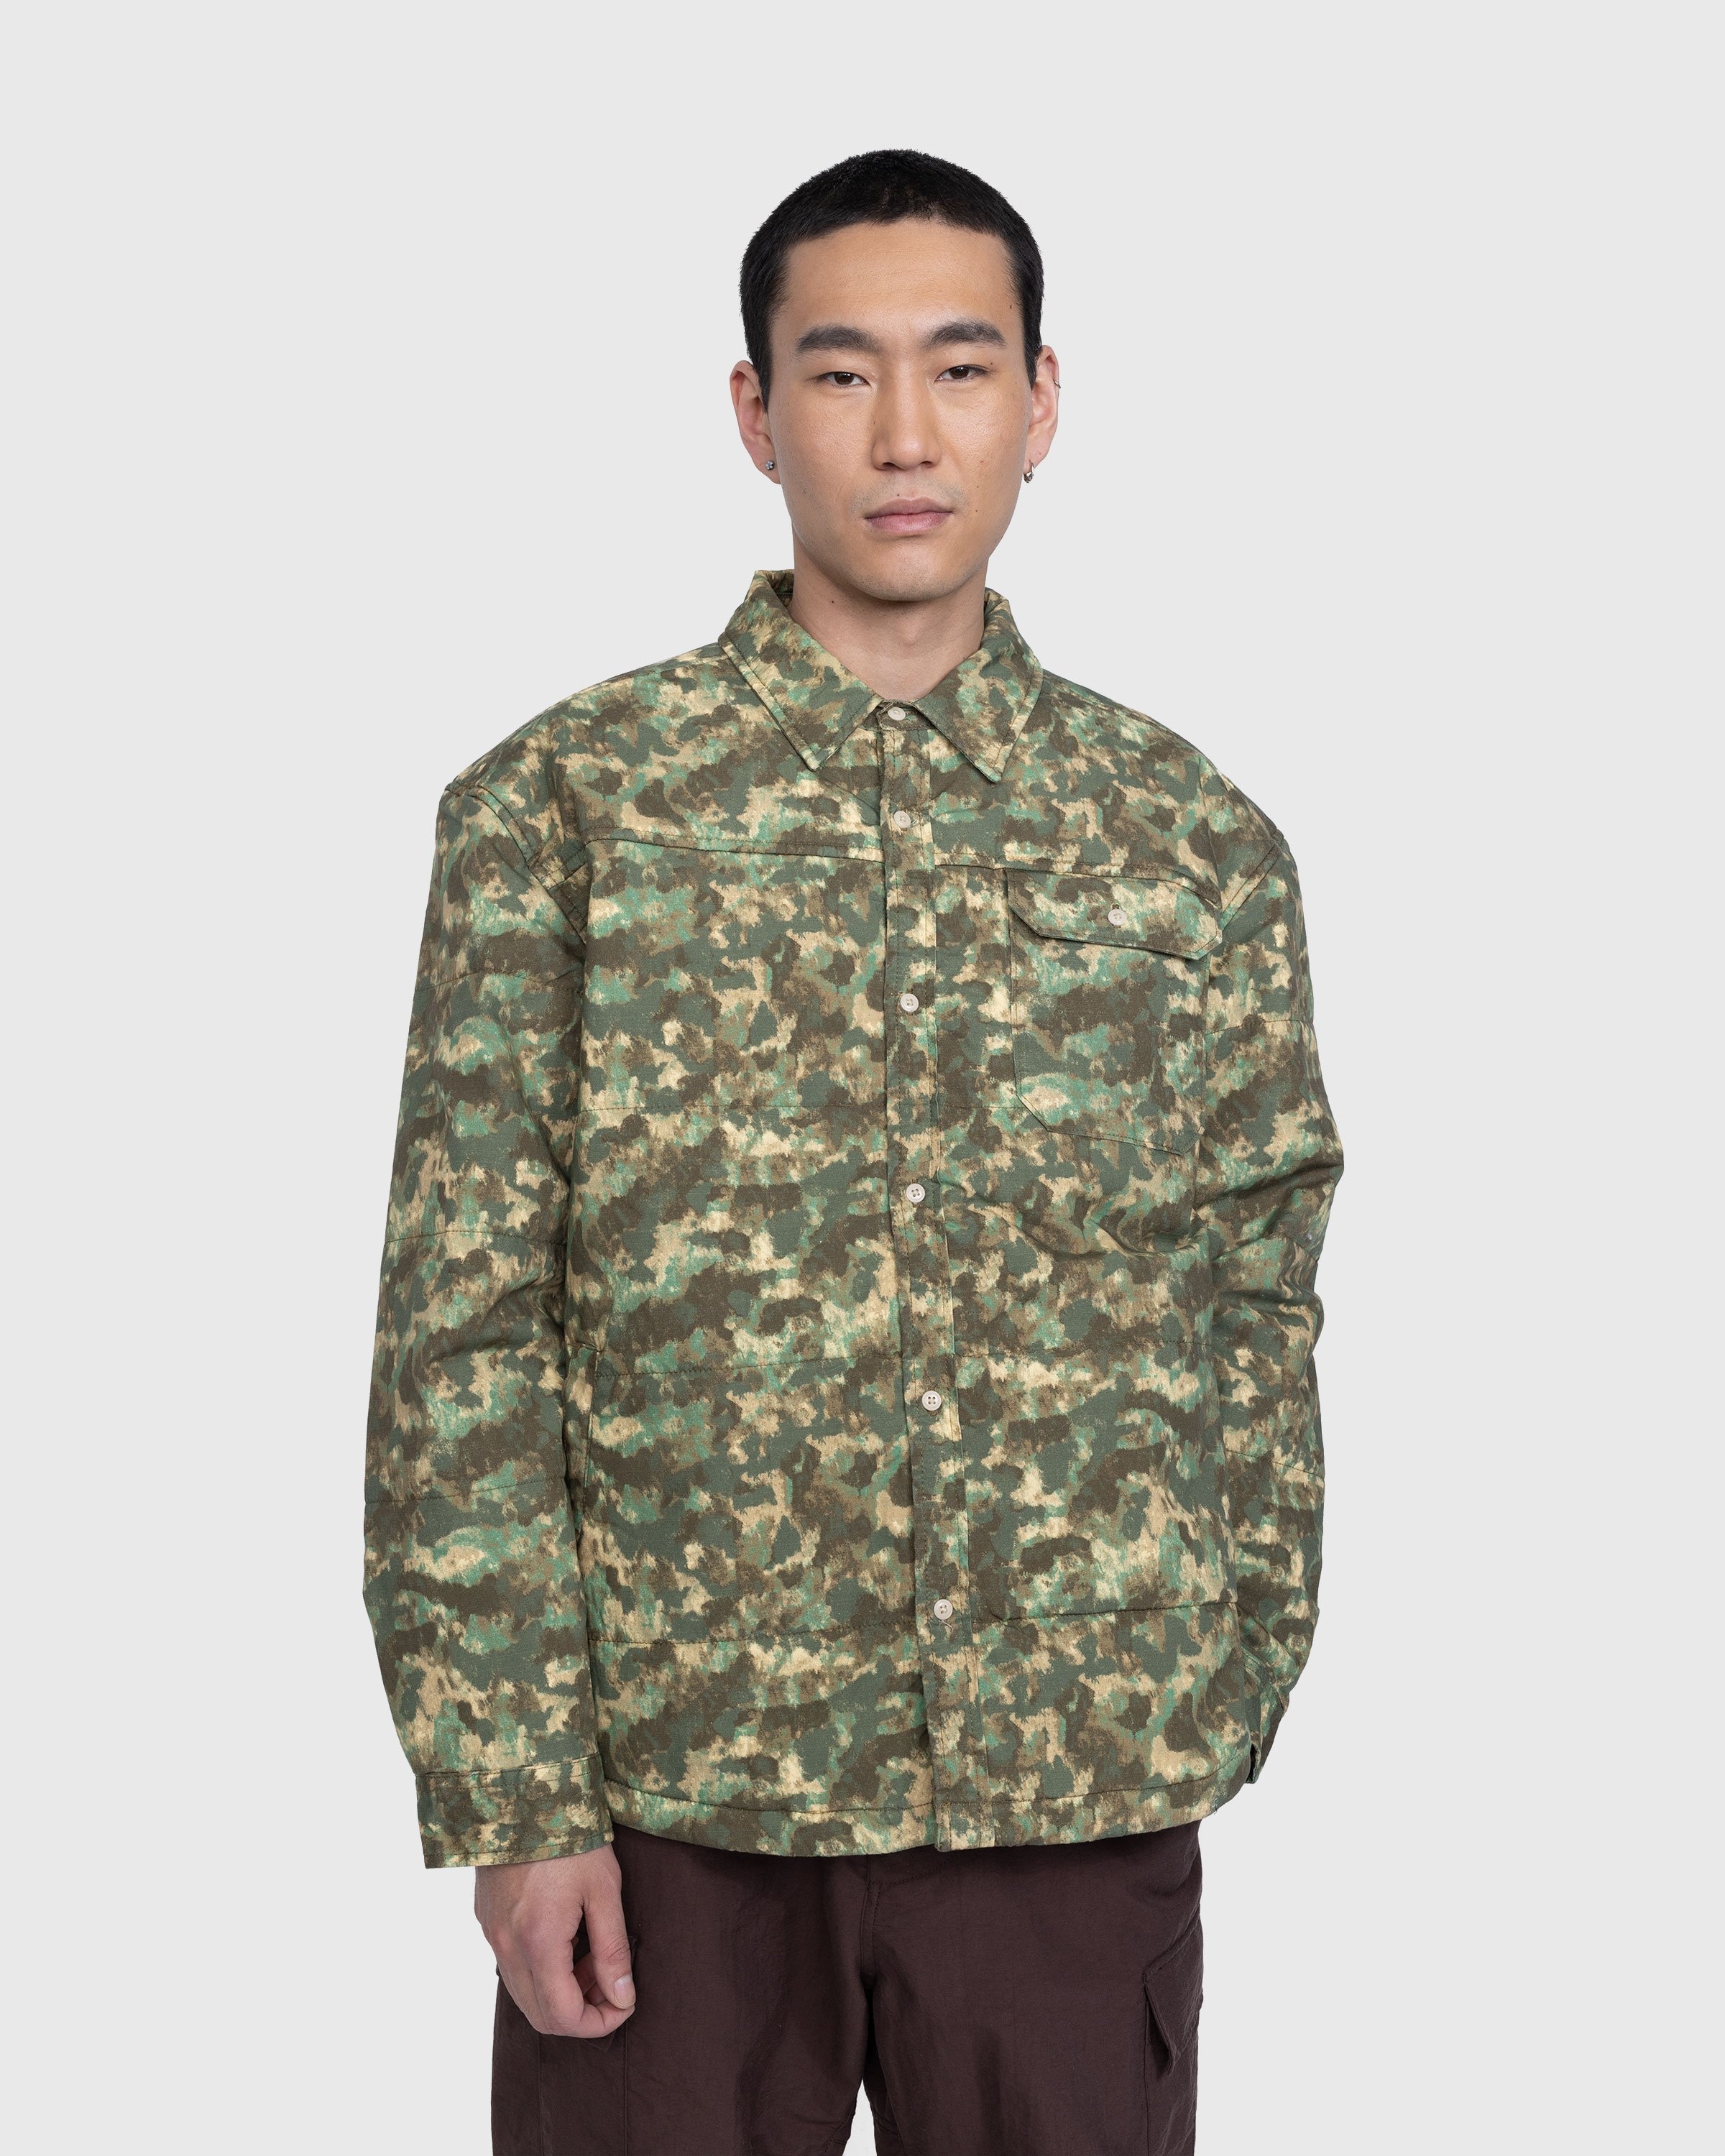 The North Face – M66 Stuffed Shirt Jacket Military Olive/Stippled Camo Print - Outerwear - Green - Image 2